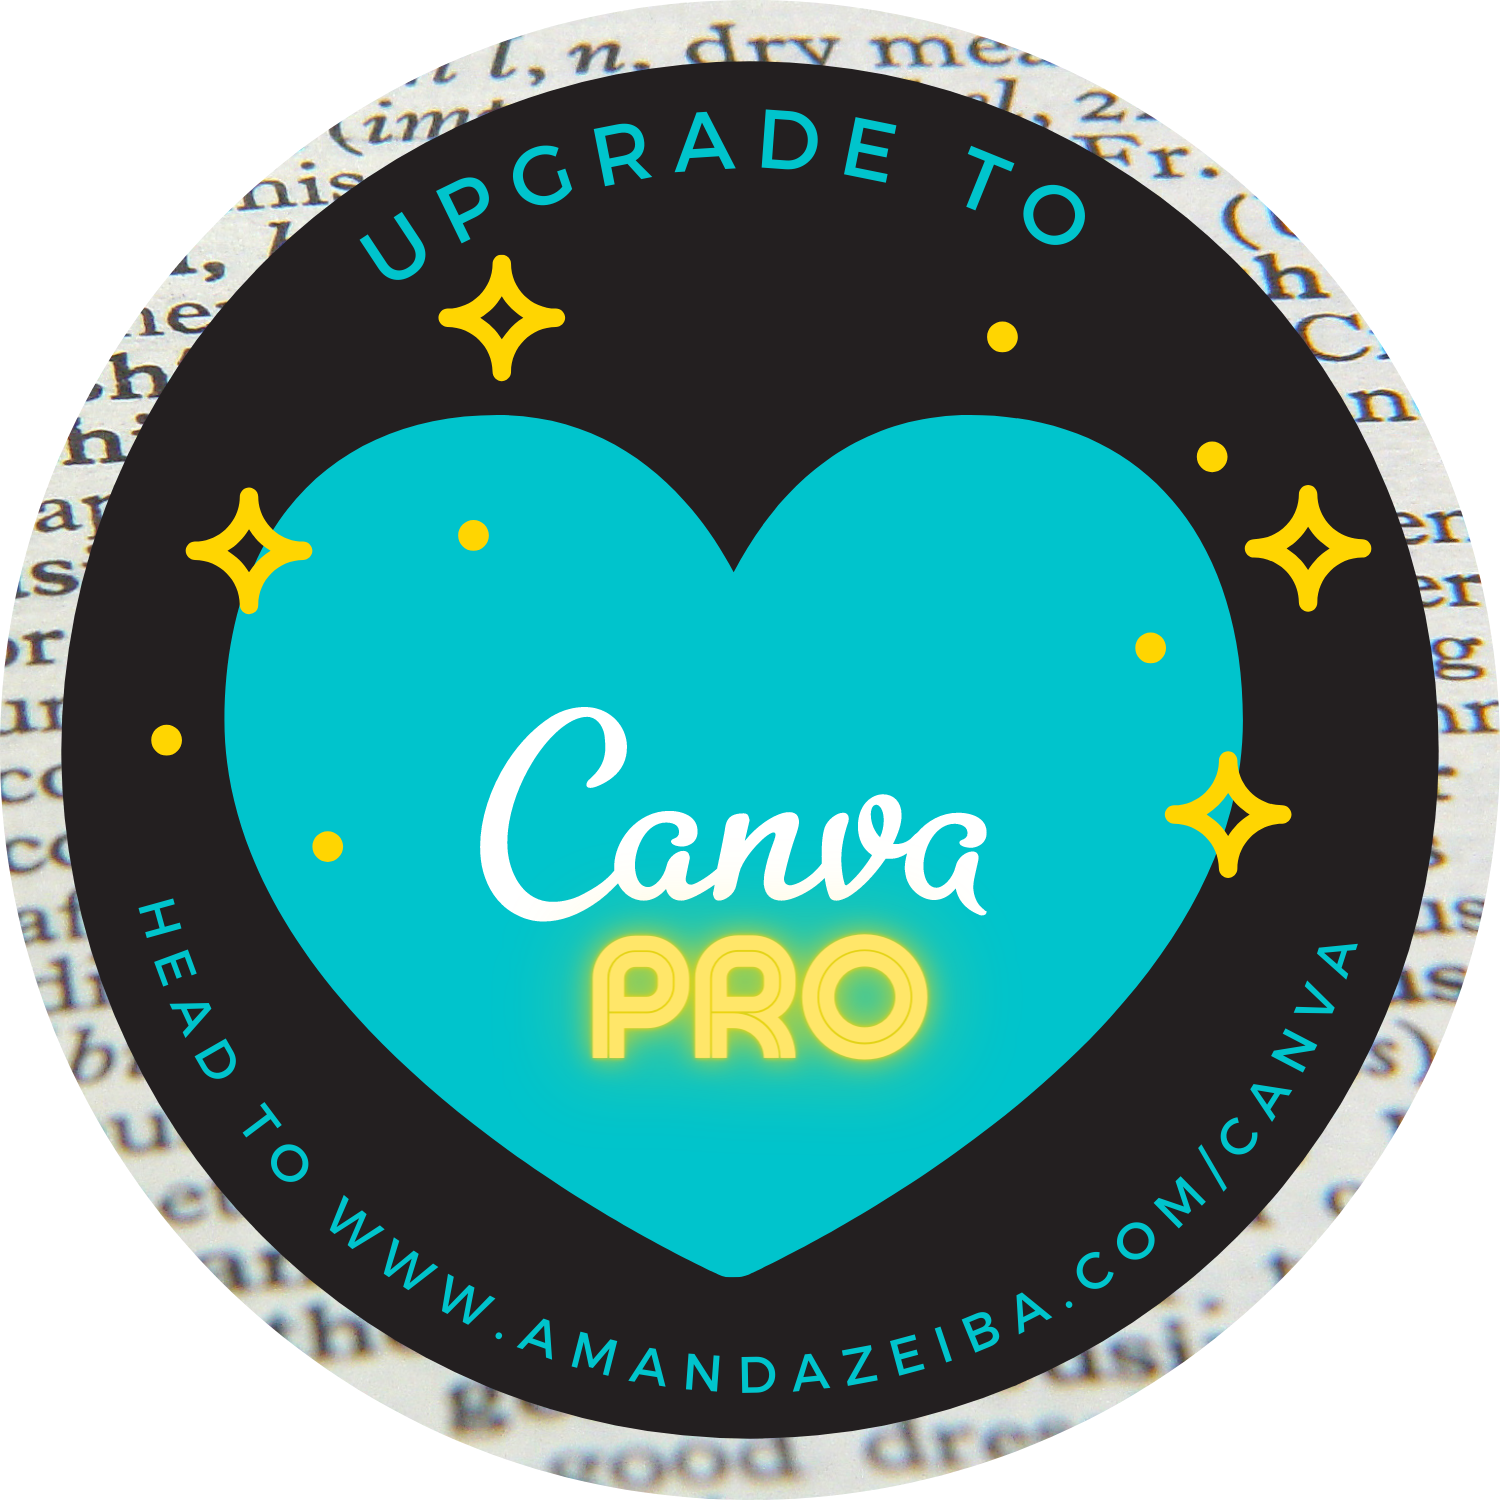 upgrade to Canva Pro - it's so worth it!